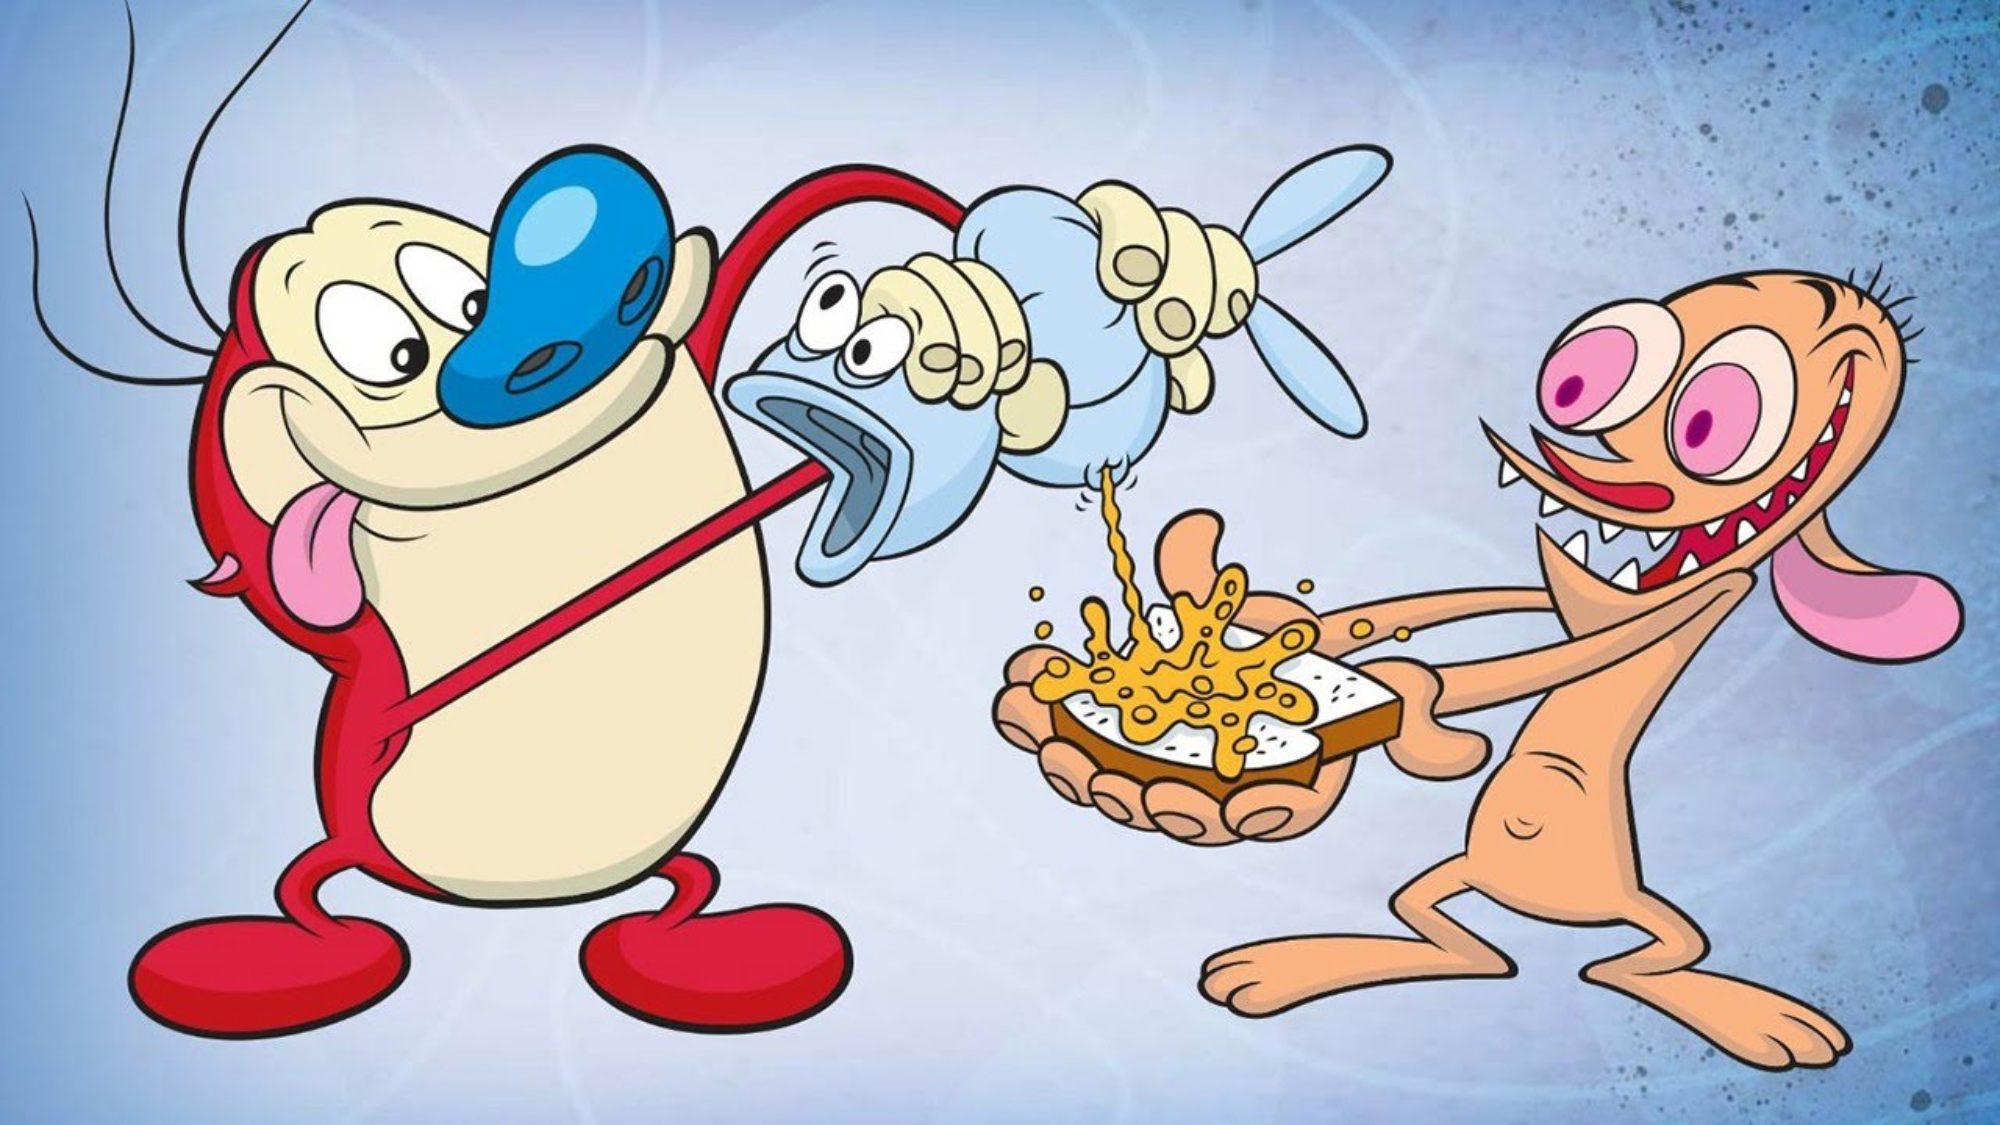 Ren and Stimpy in one of their zany adventures